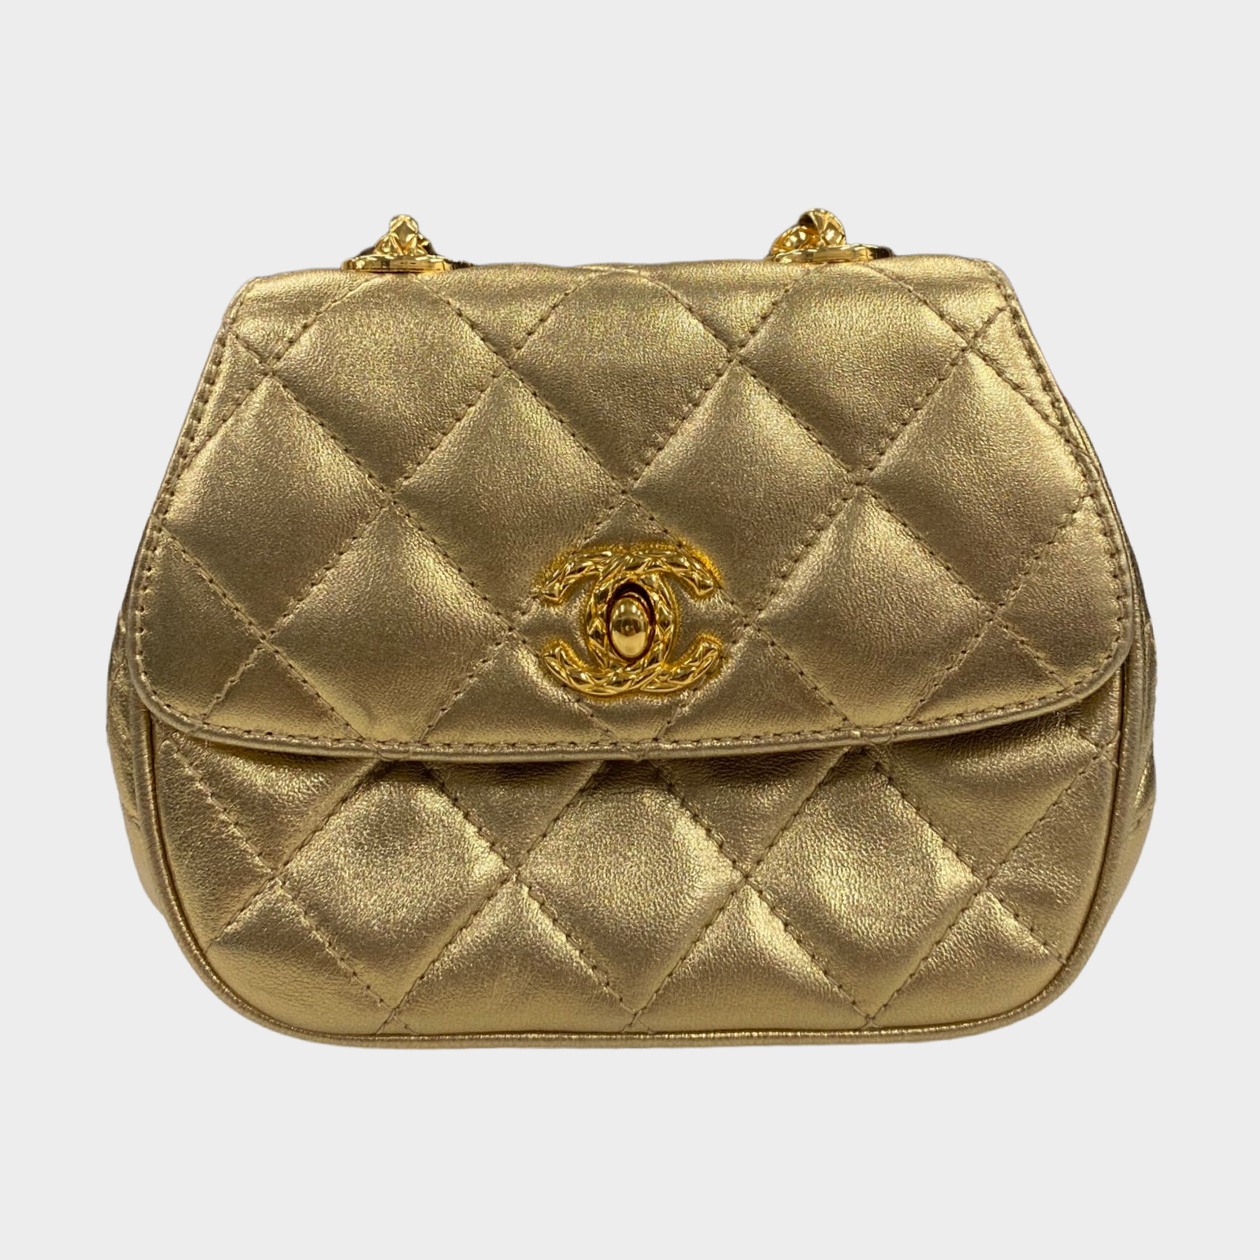 Chanel Vintage Chanel 7.5  Classic Flap Black Quilted Leather